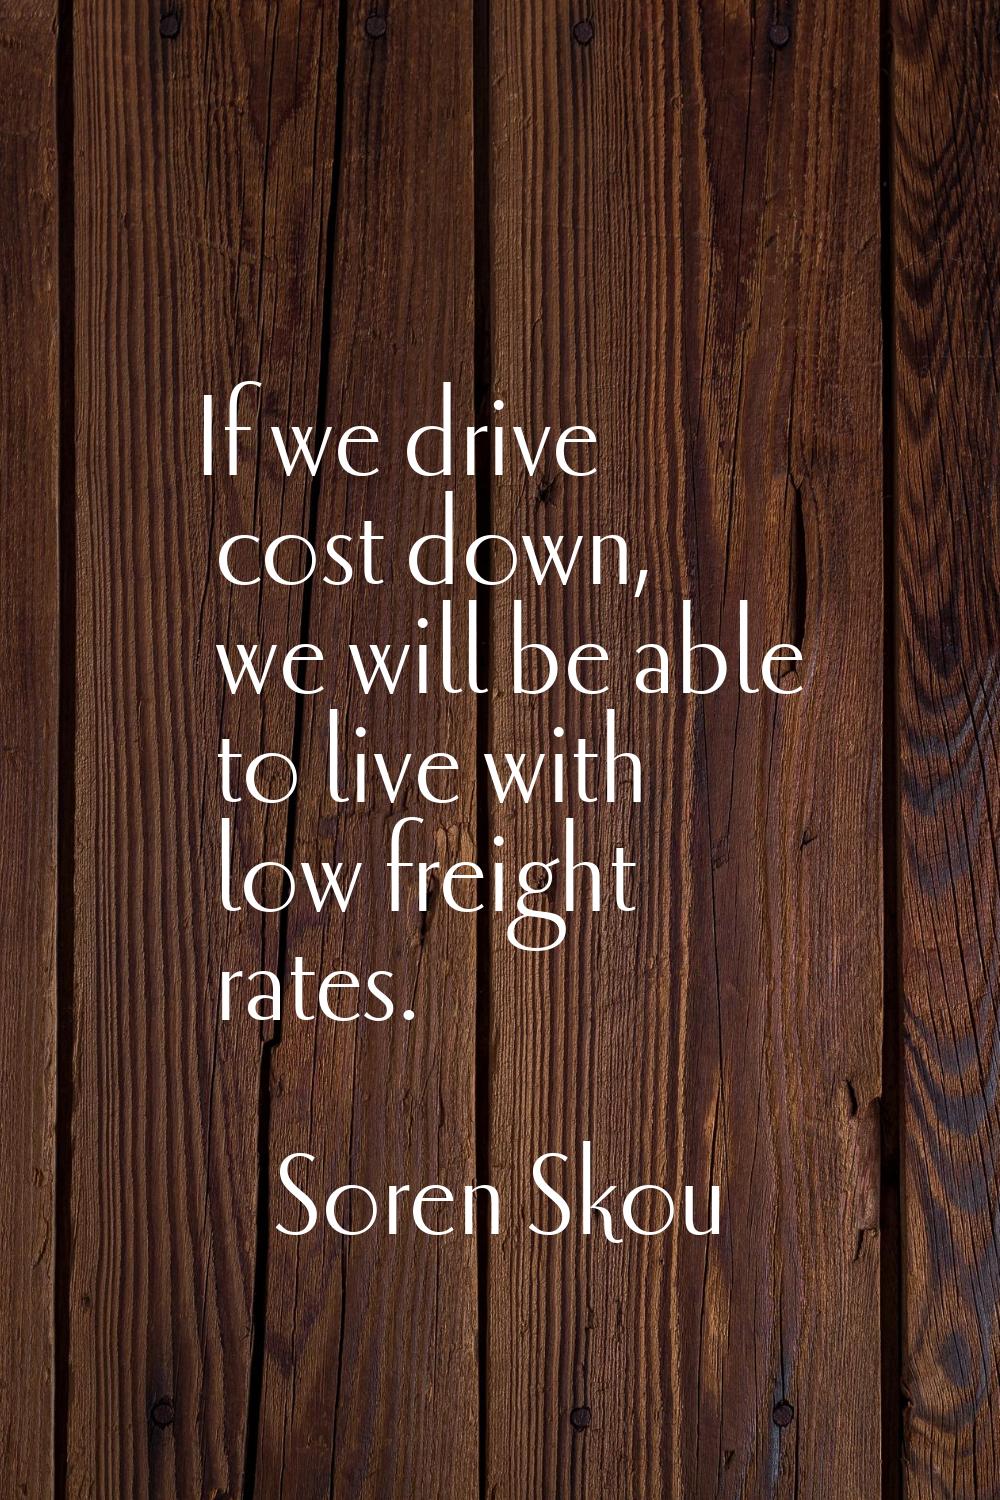 If we drive cost down, we will be able to live with low freight rates.